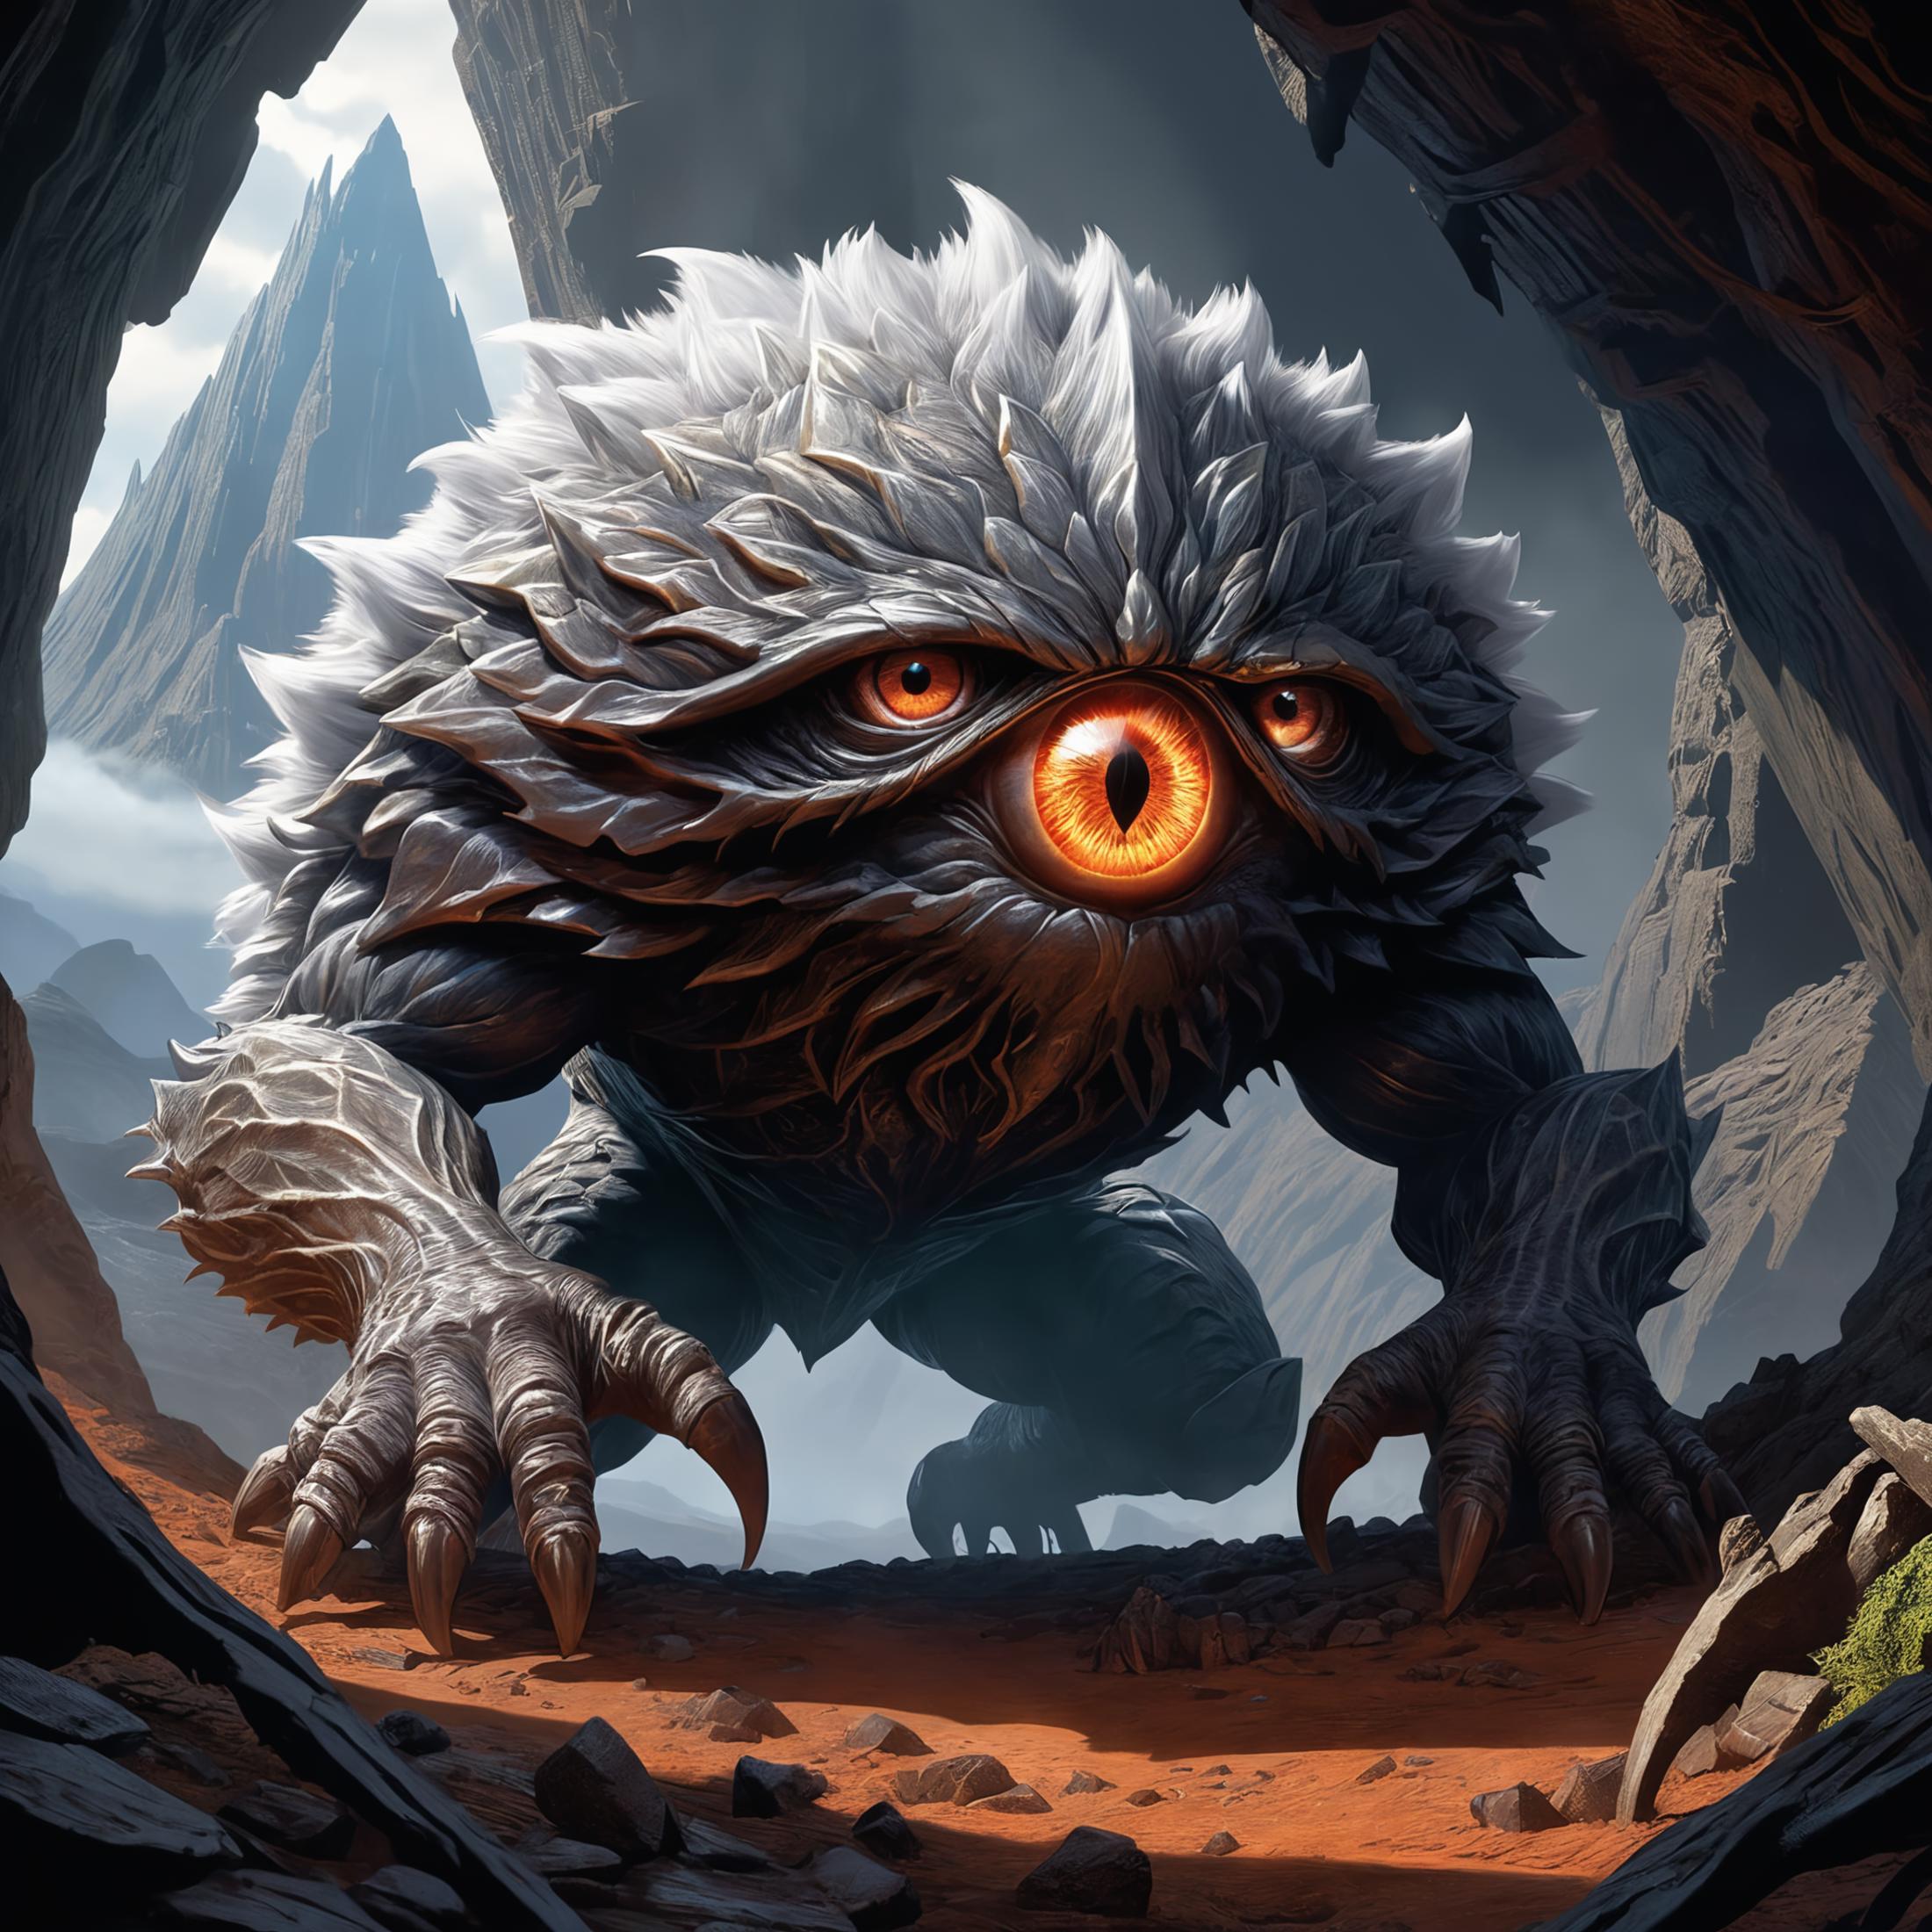 A Creepy Giant Monster with Orange Eyes in a Cave